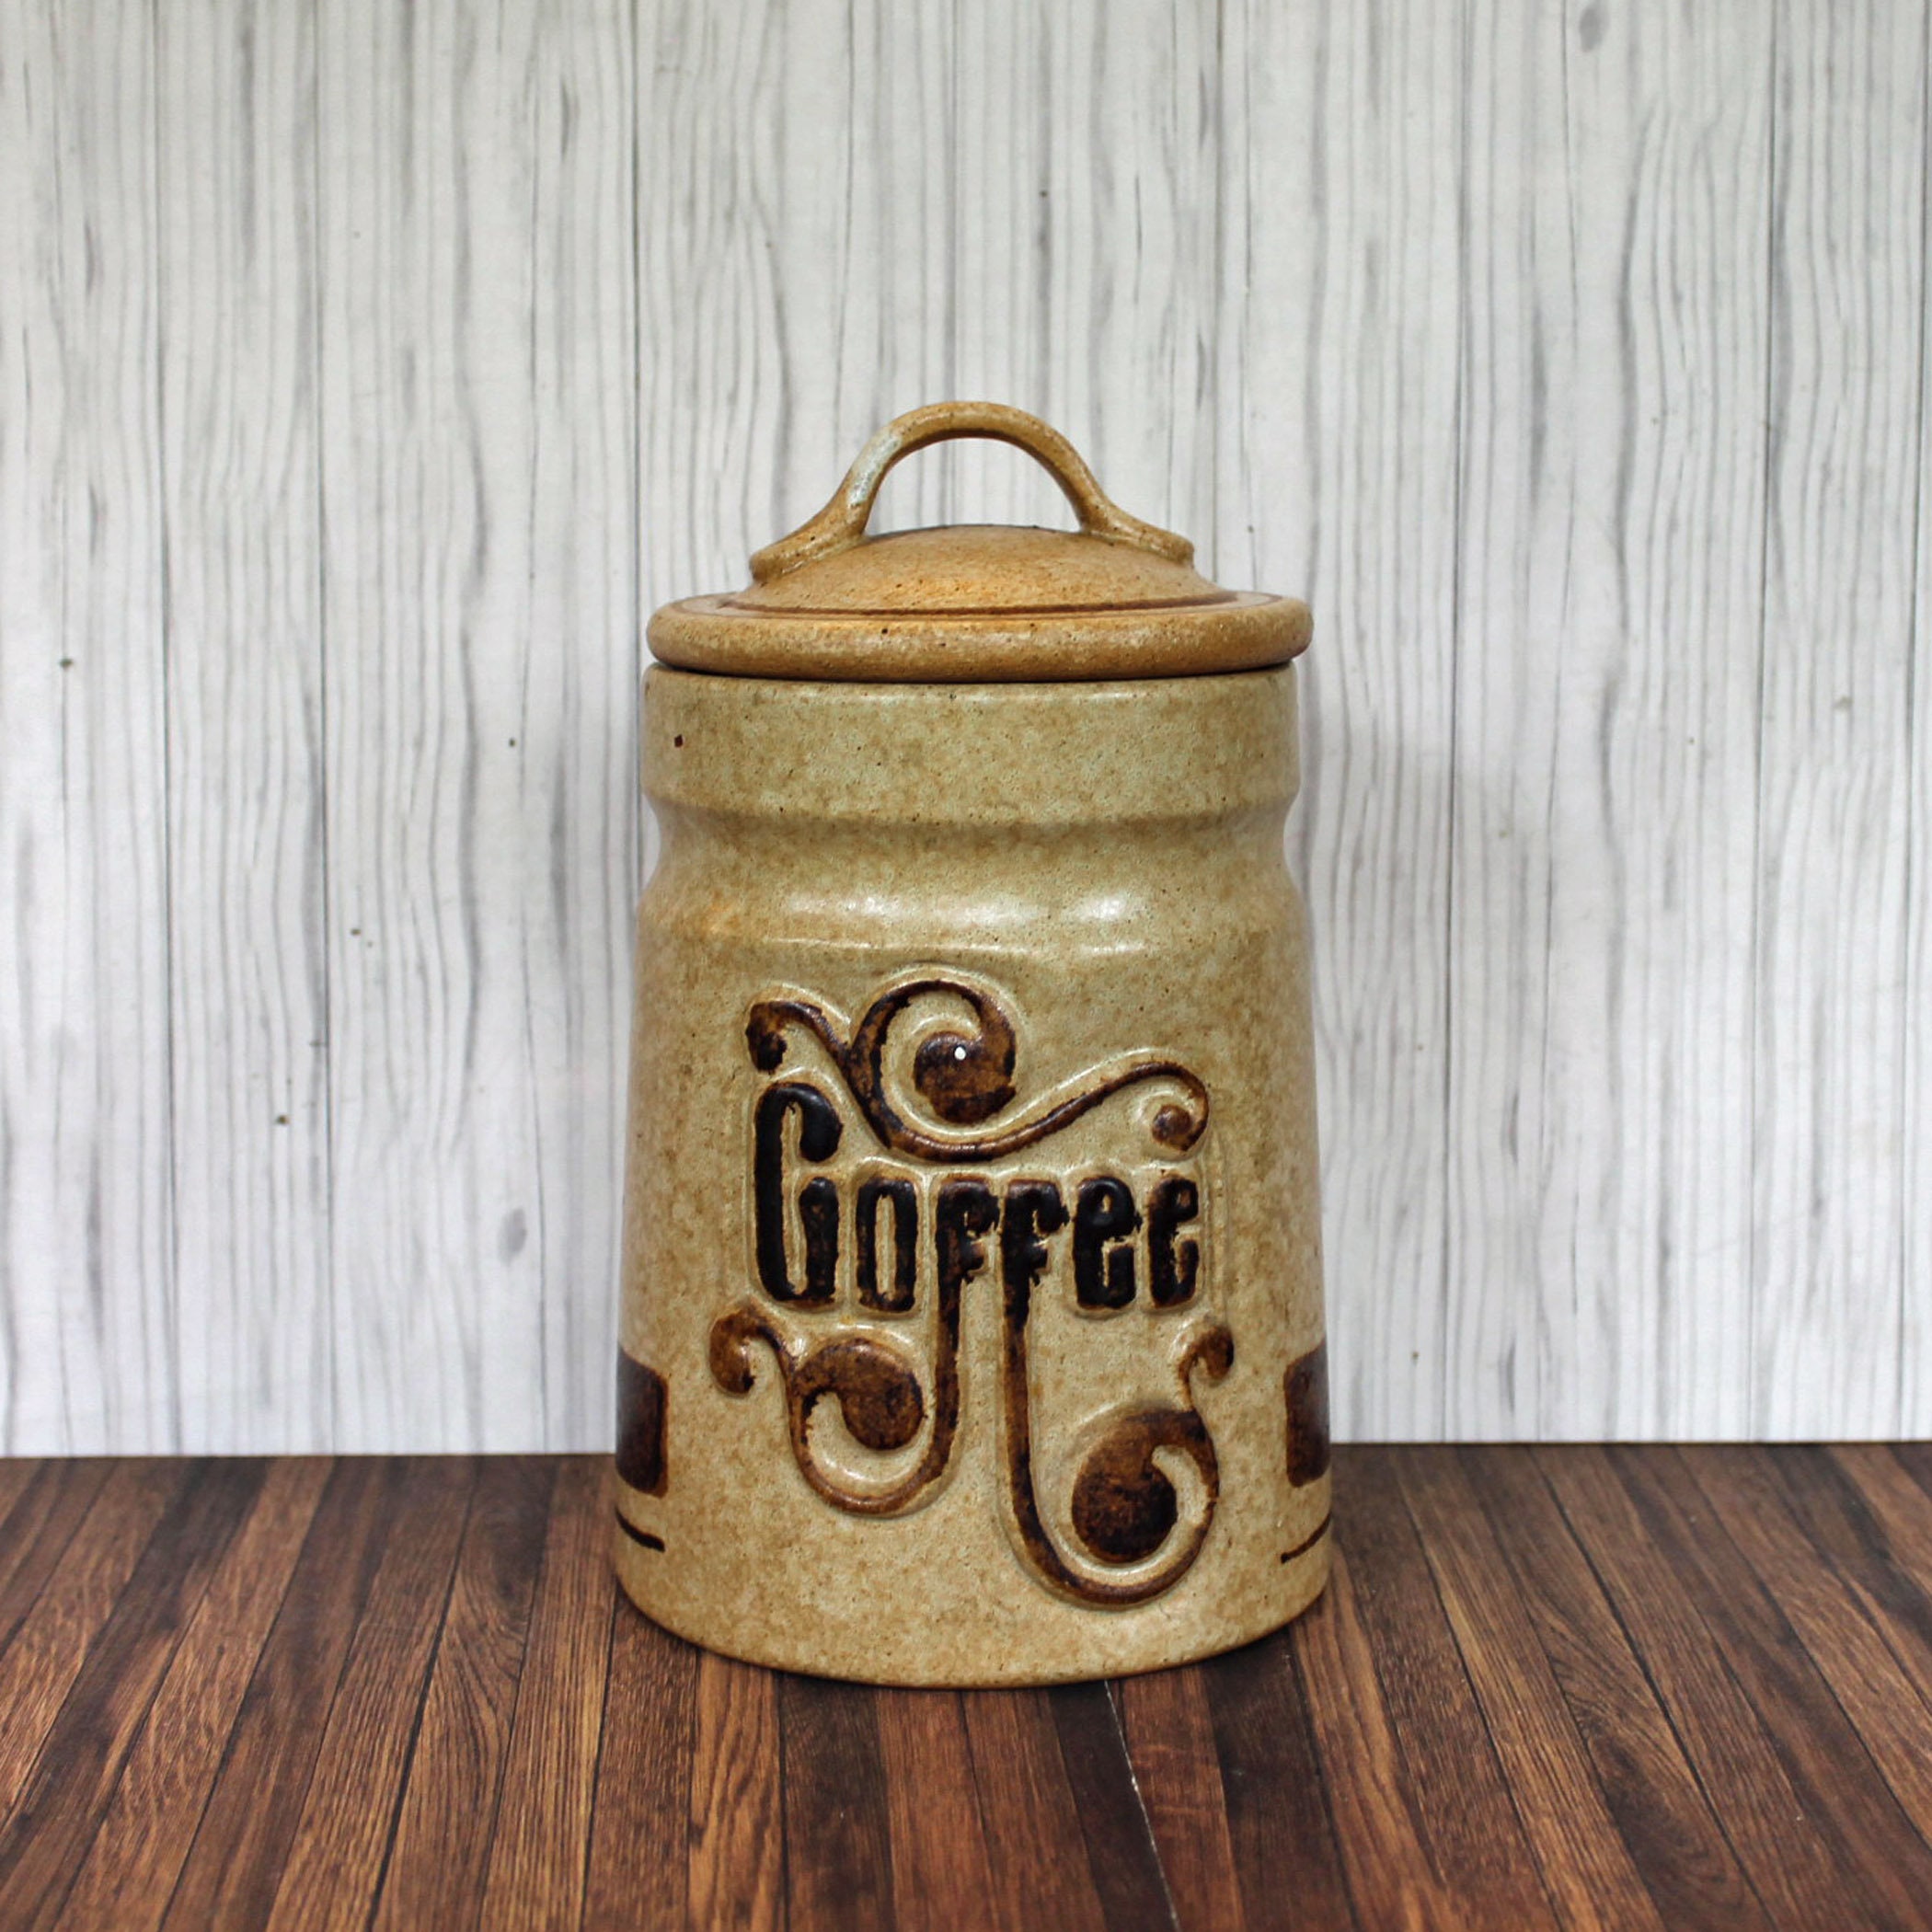 Vintage Pottery Craft USA Ceramic Stoneware Coffee Canister with Lid